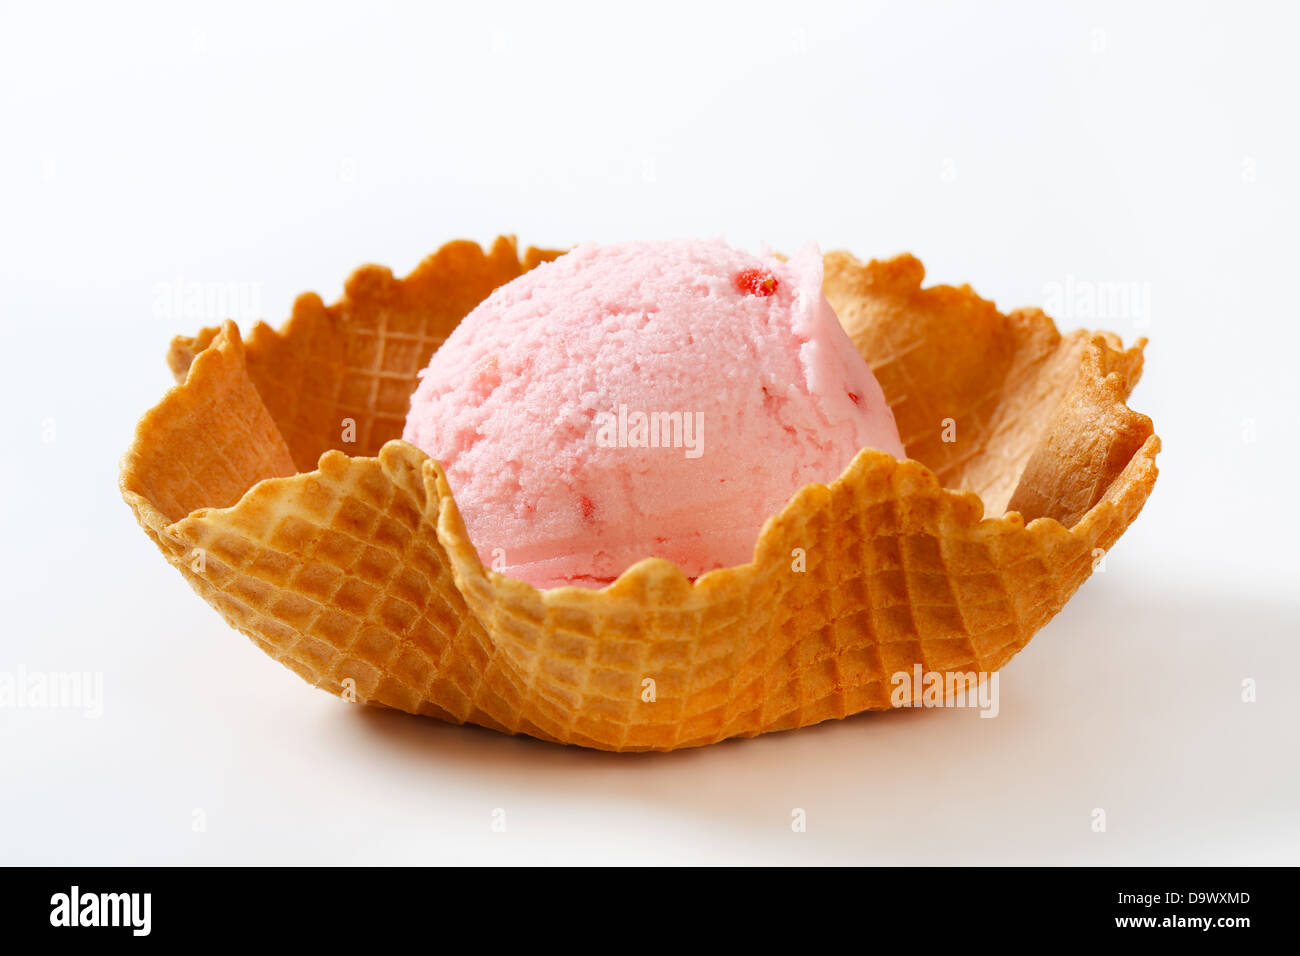 Pink ice cream in a waffle basket Stock Photo